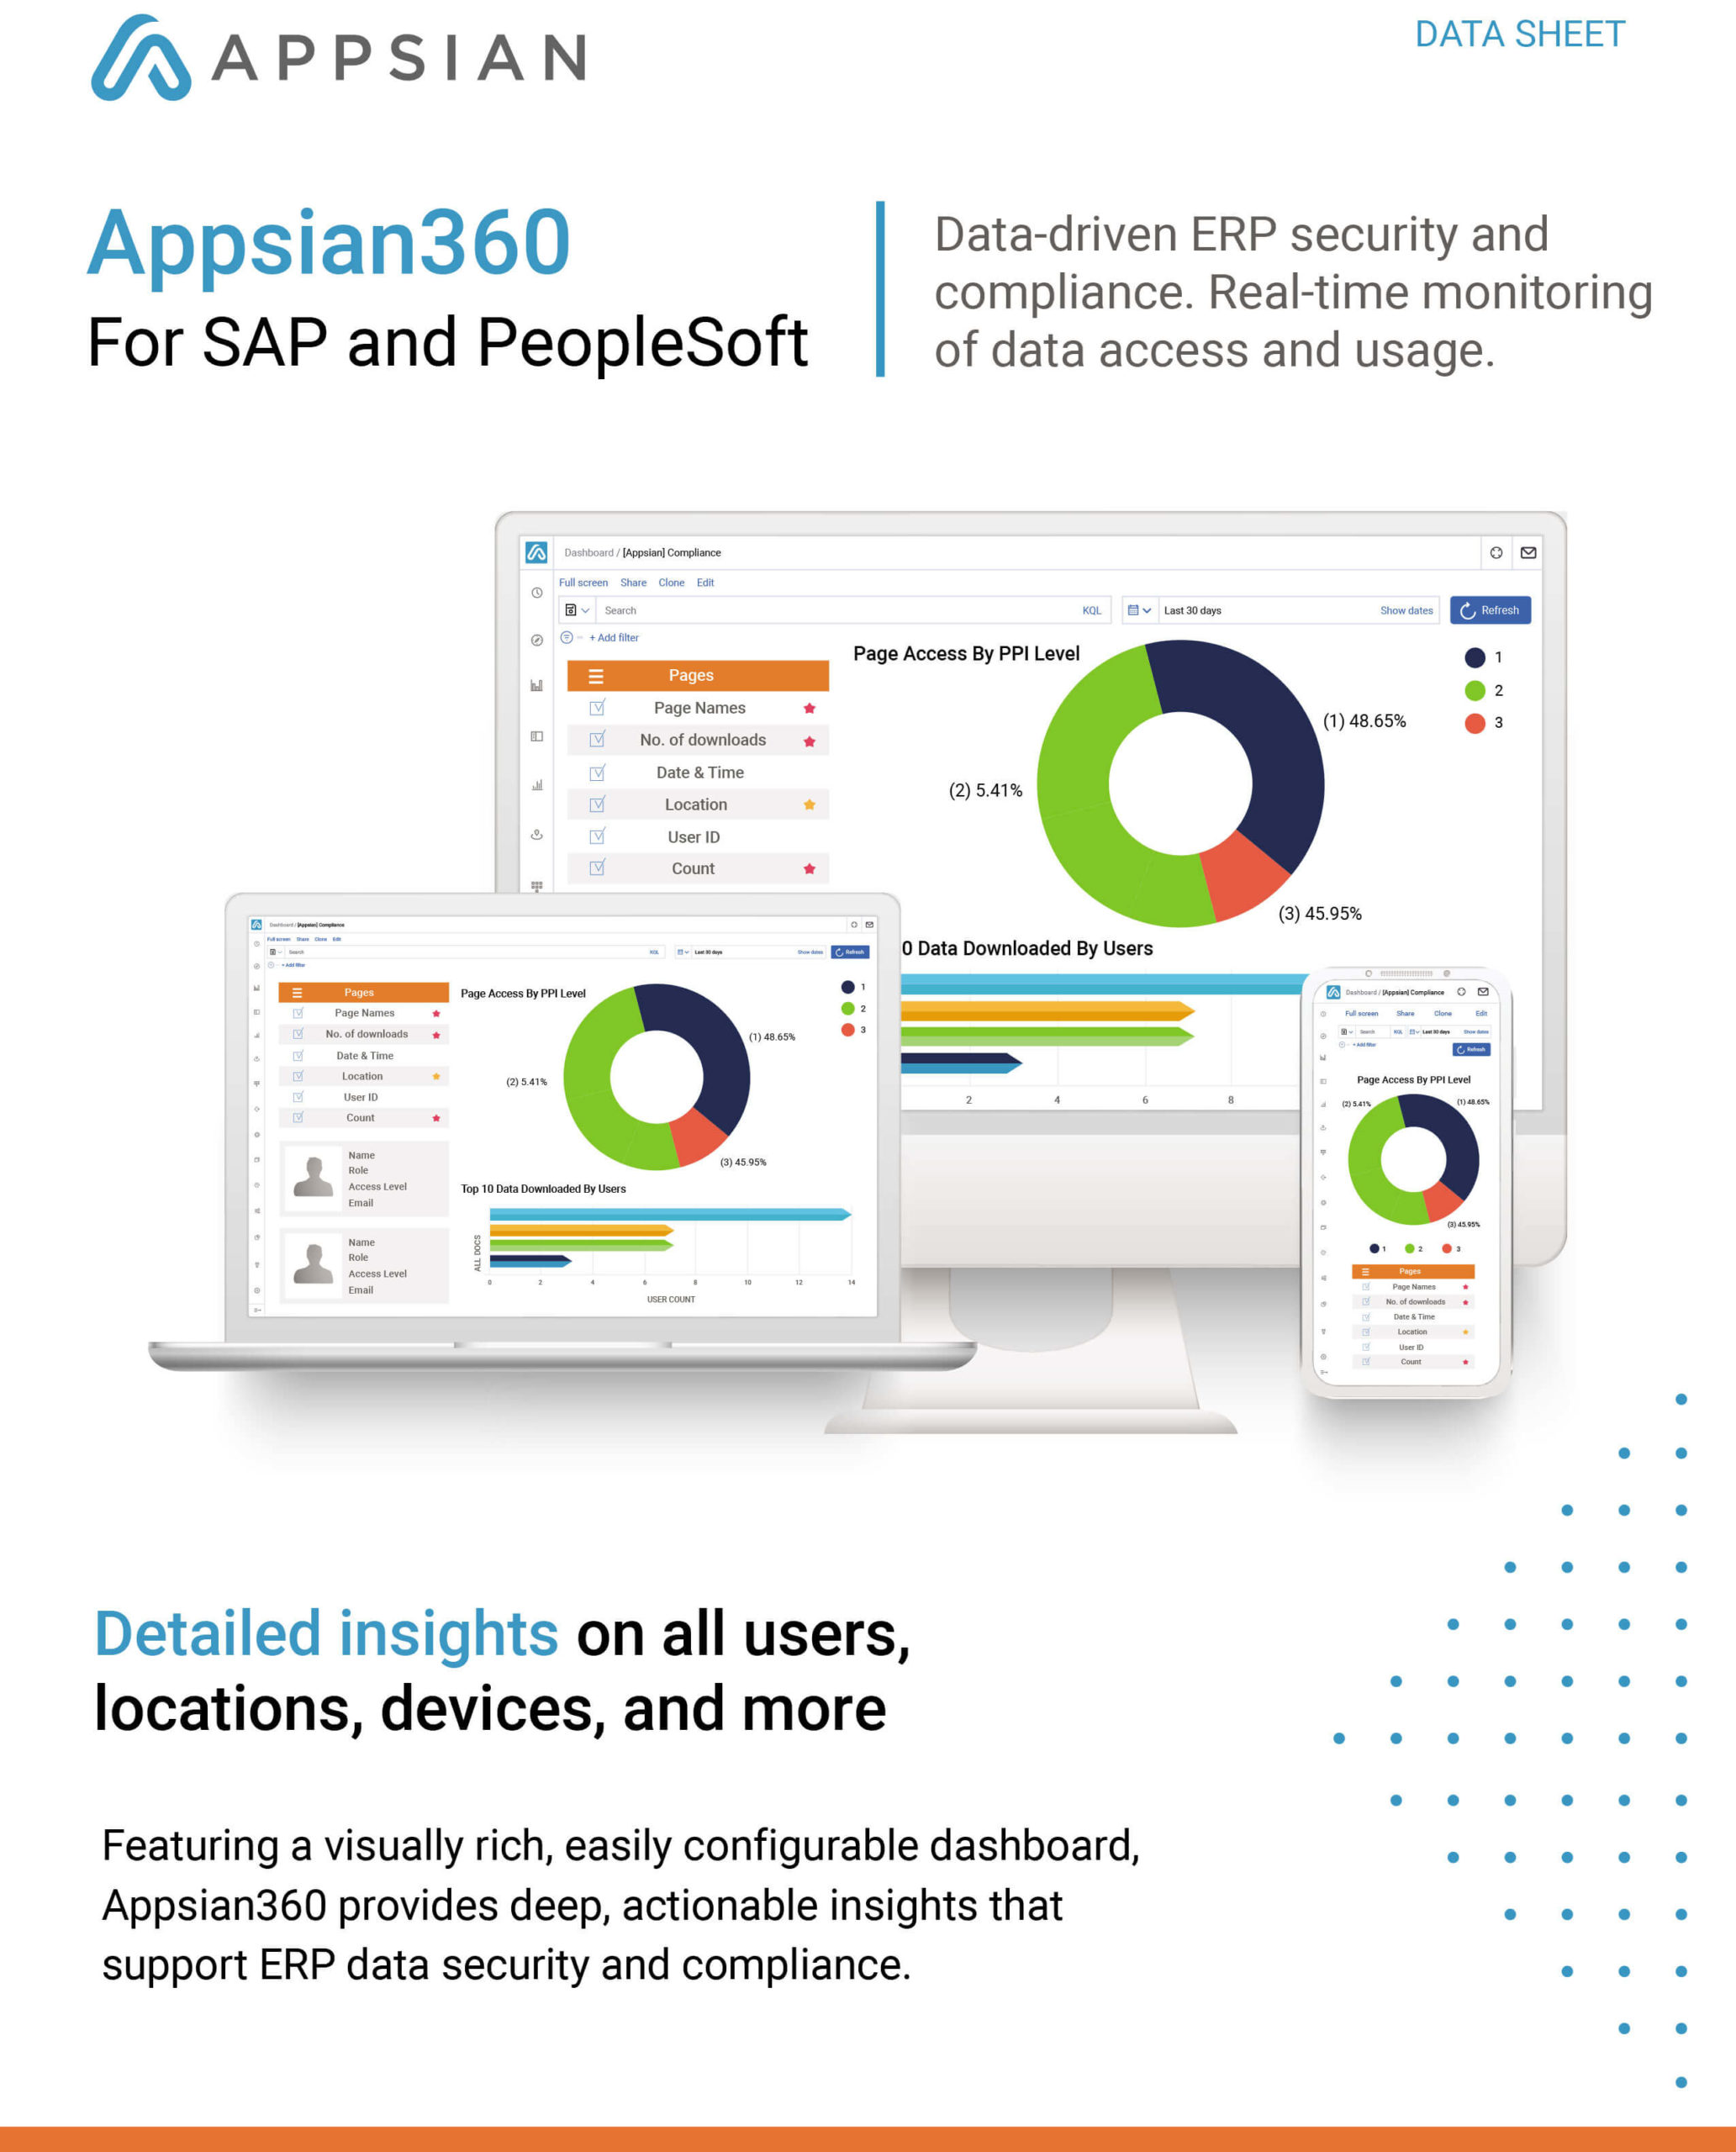 Appsian360 for SAP and PeopleSoft (Overview)